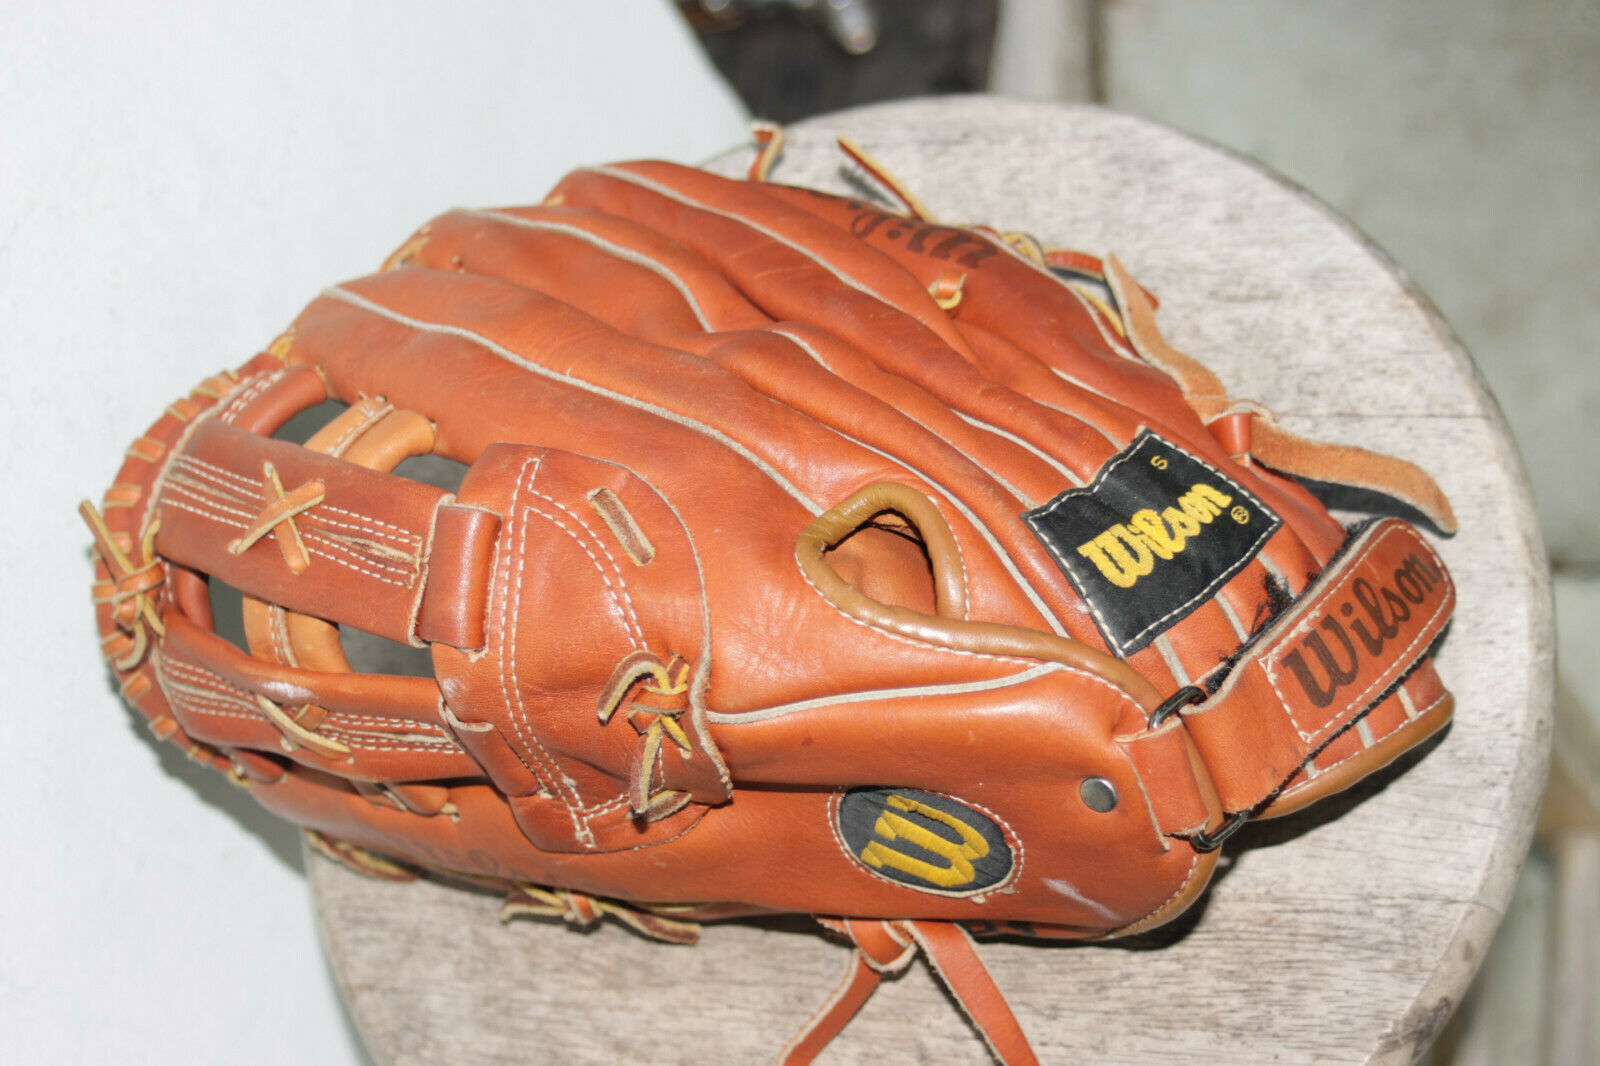 Wilson leather glove left handed Kevin McReynolds Signature Model A2122 - $60.00